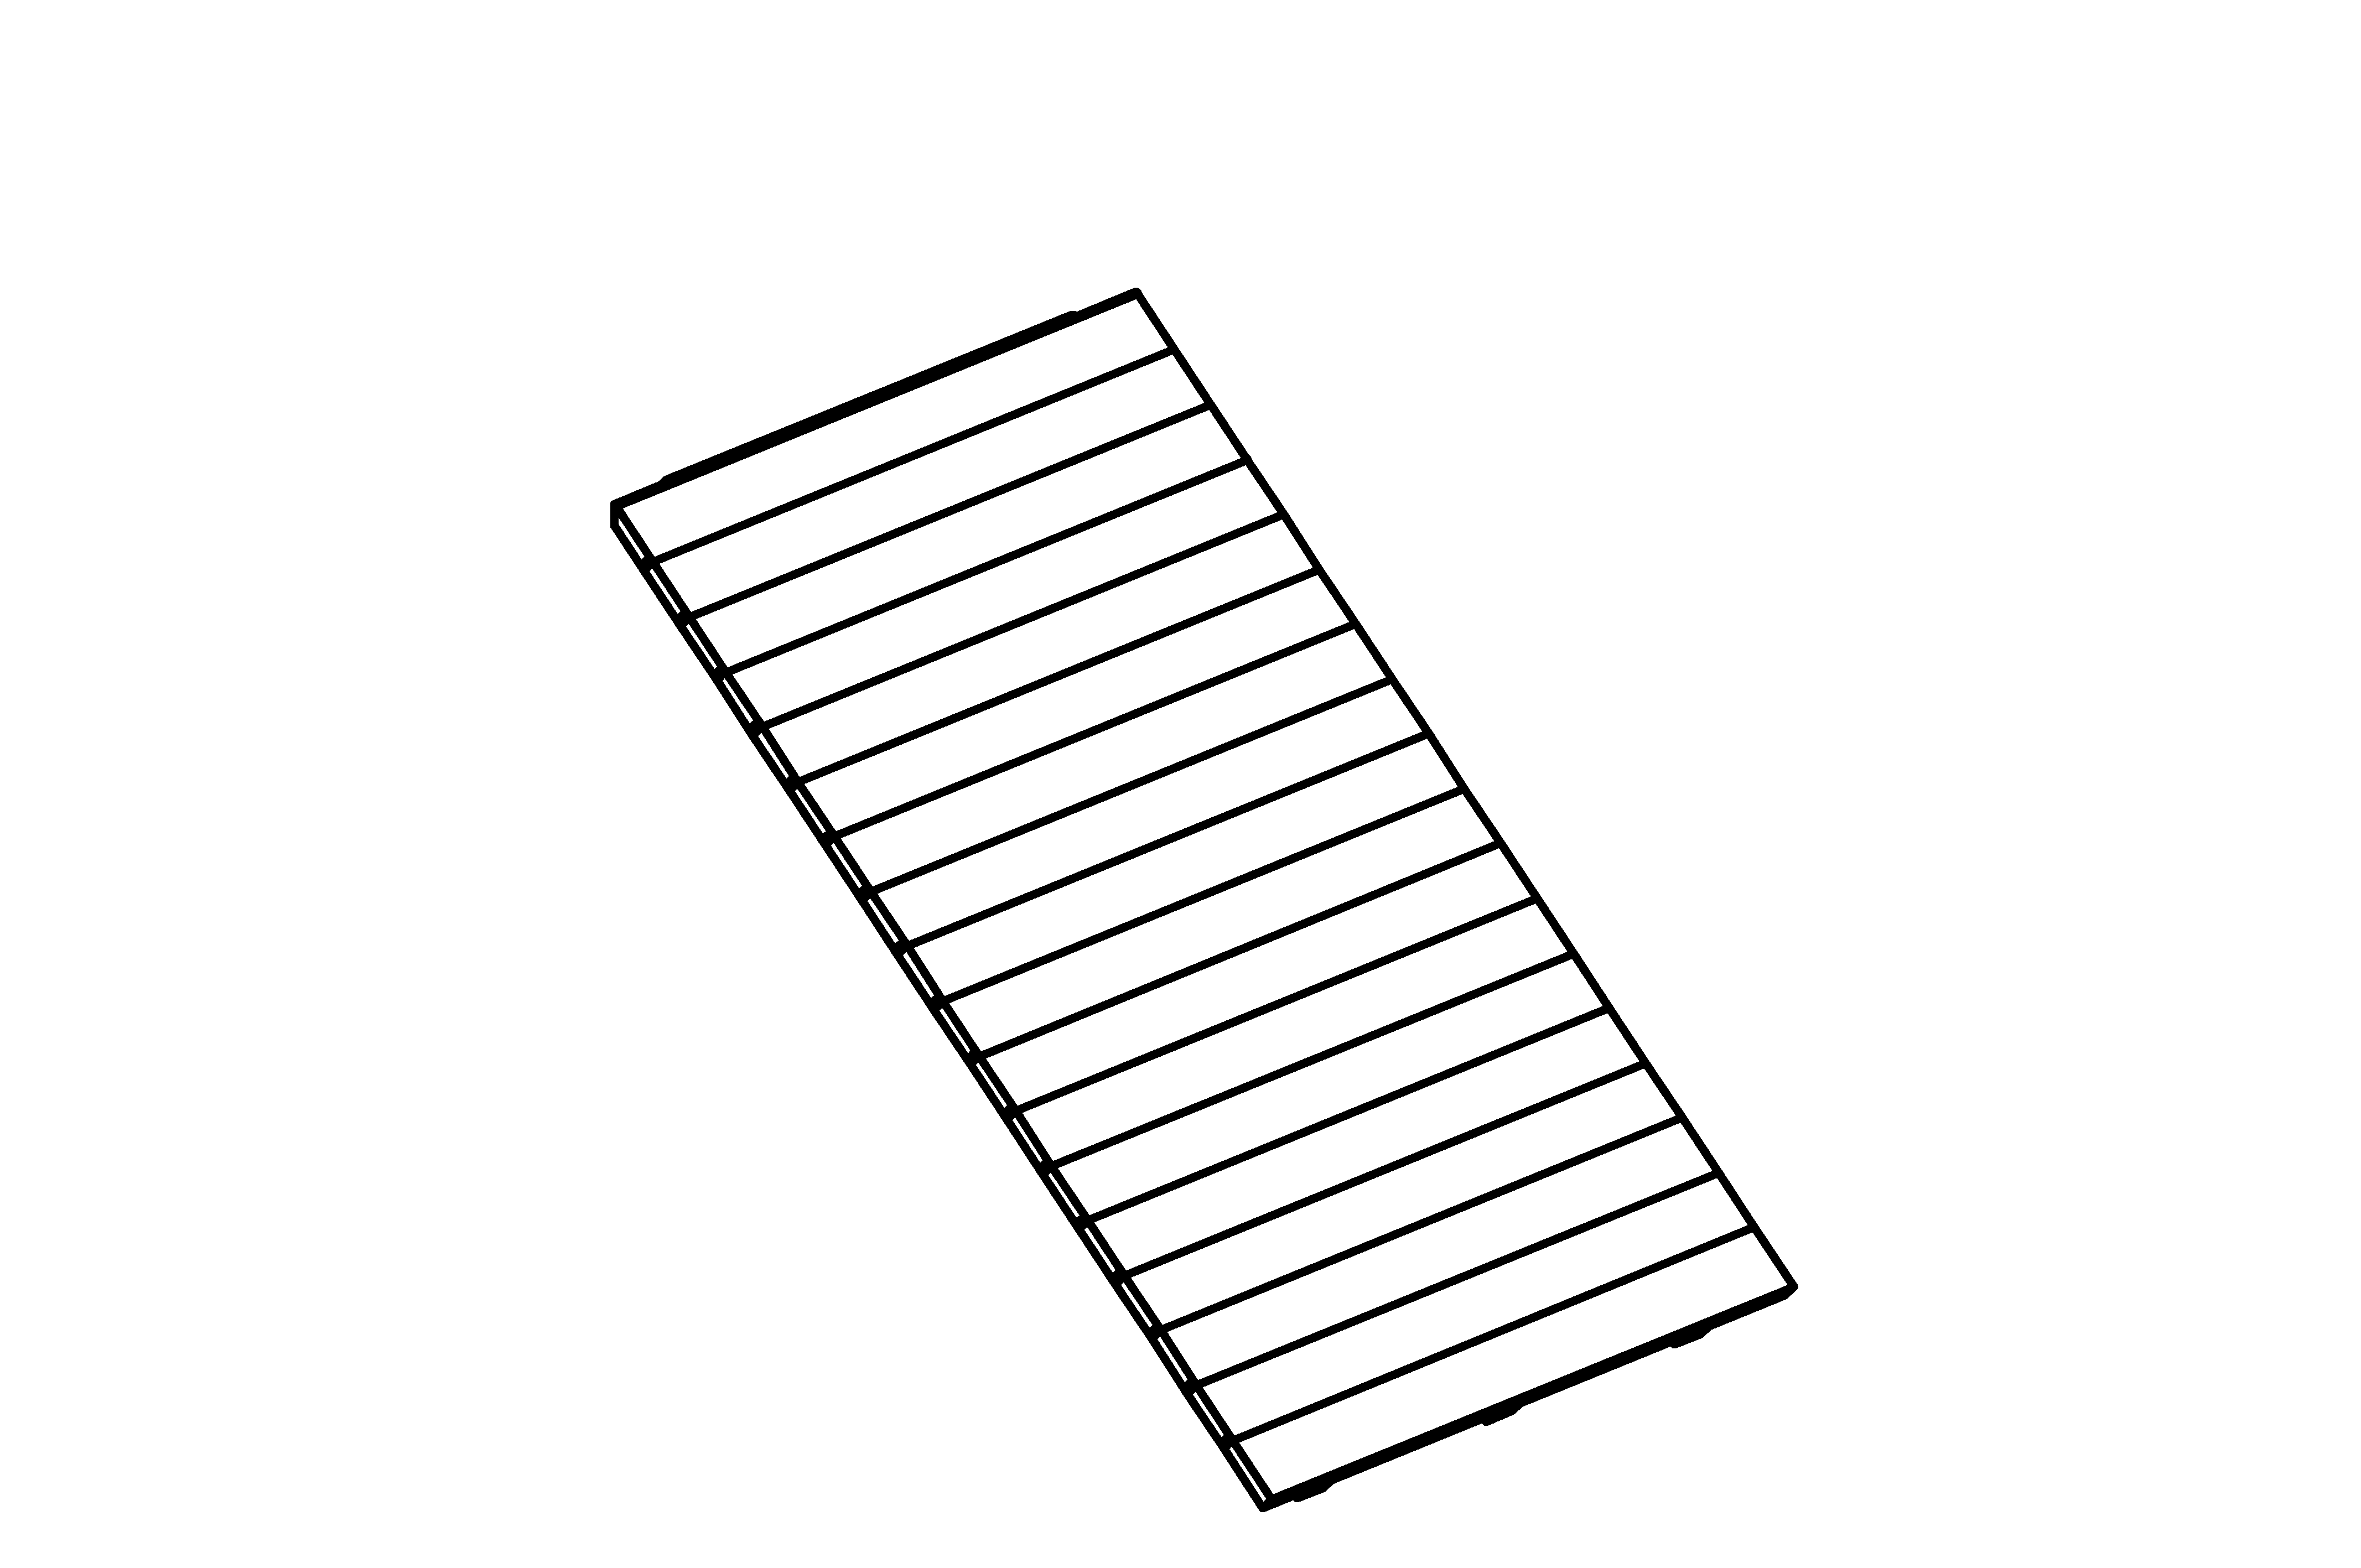 Inclined Wall, height = 2 m, width = 2 m